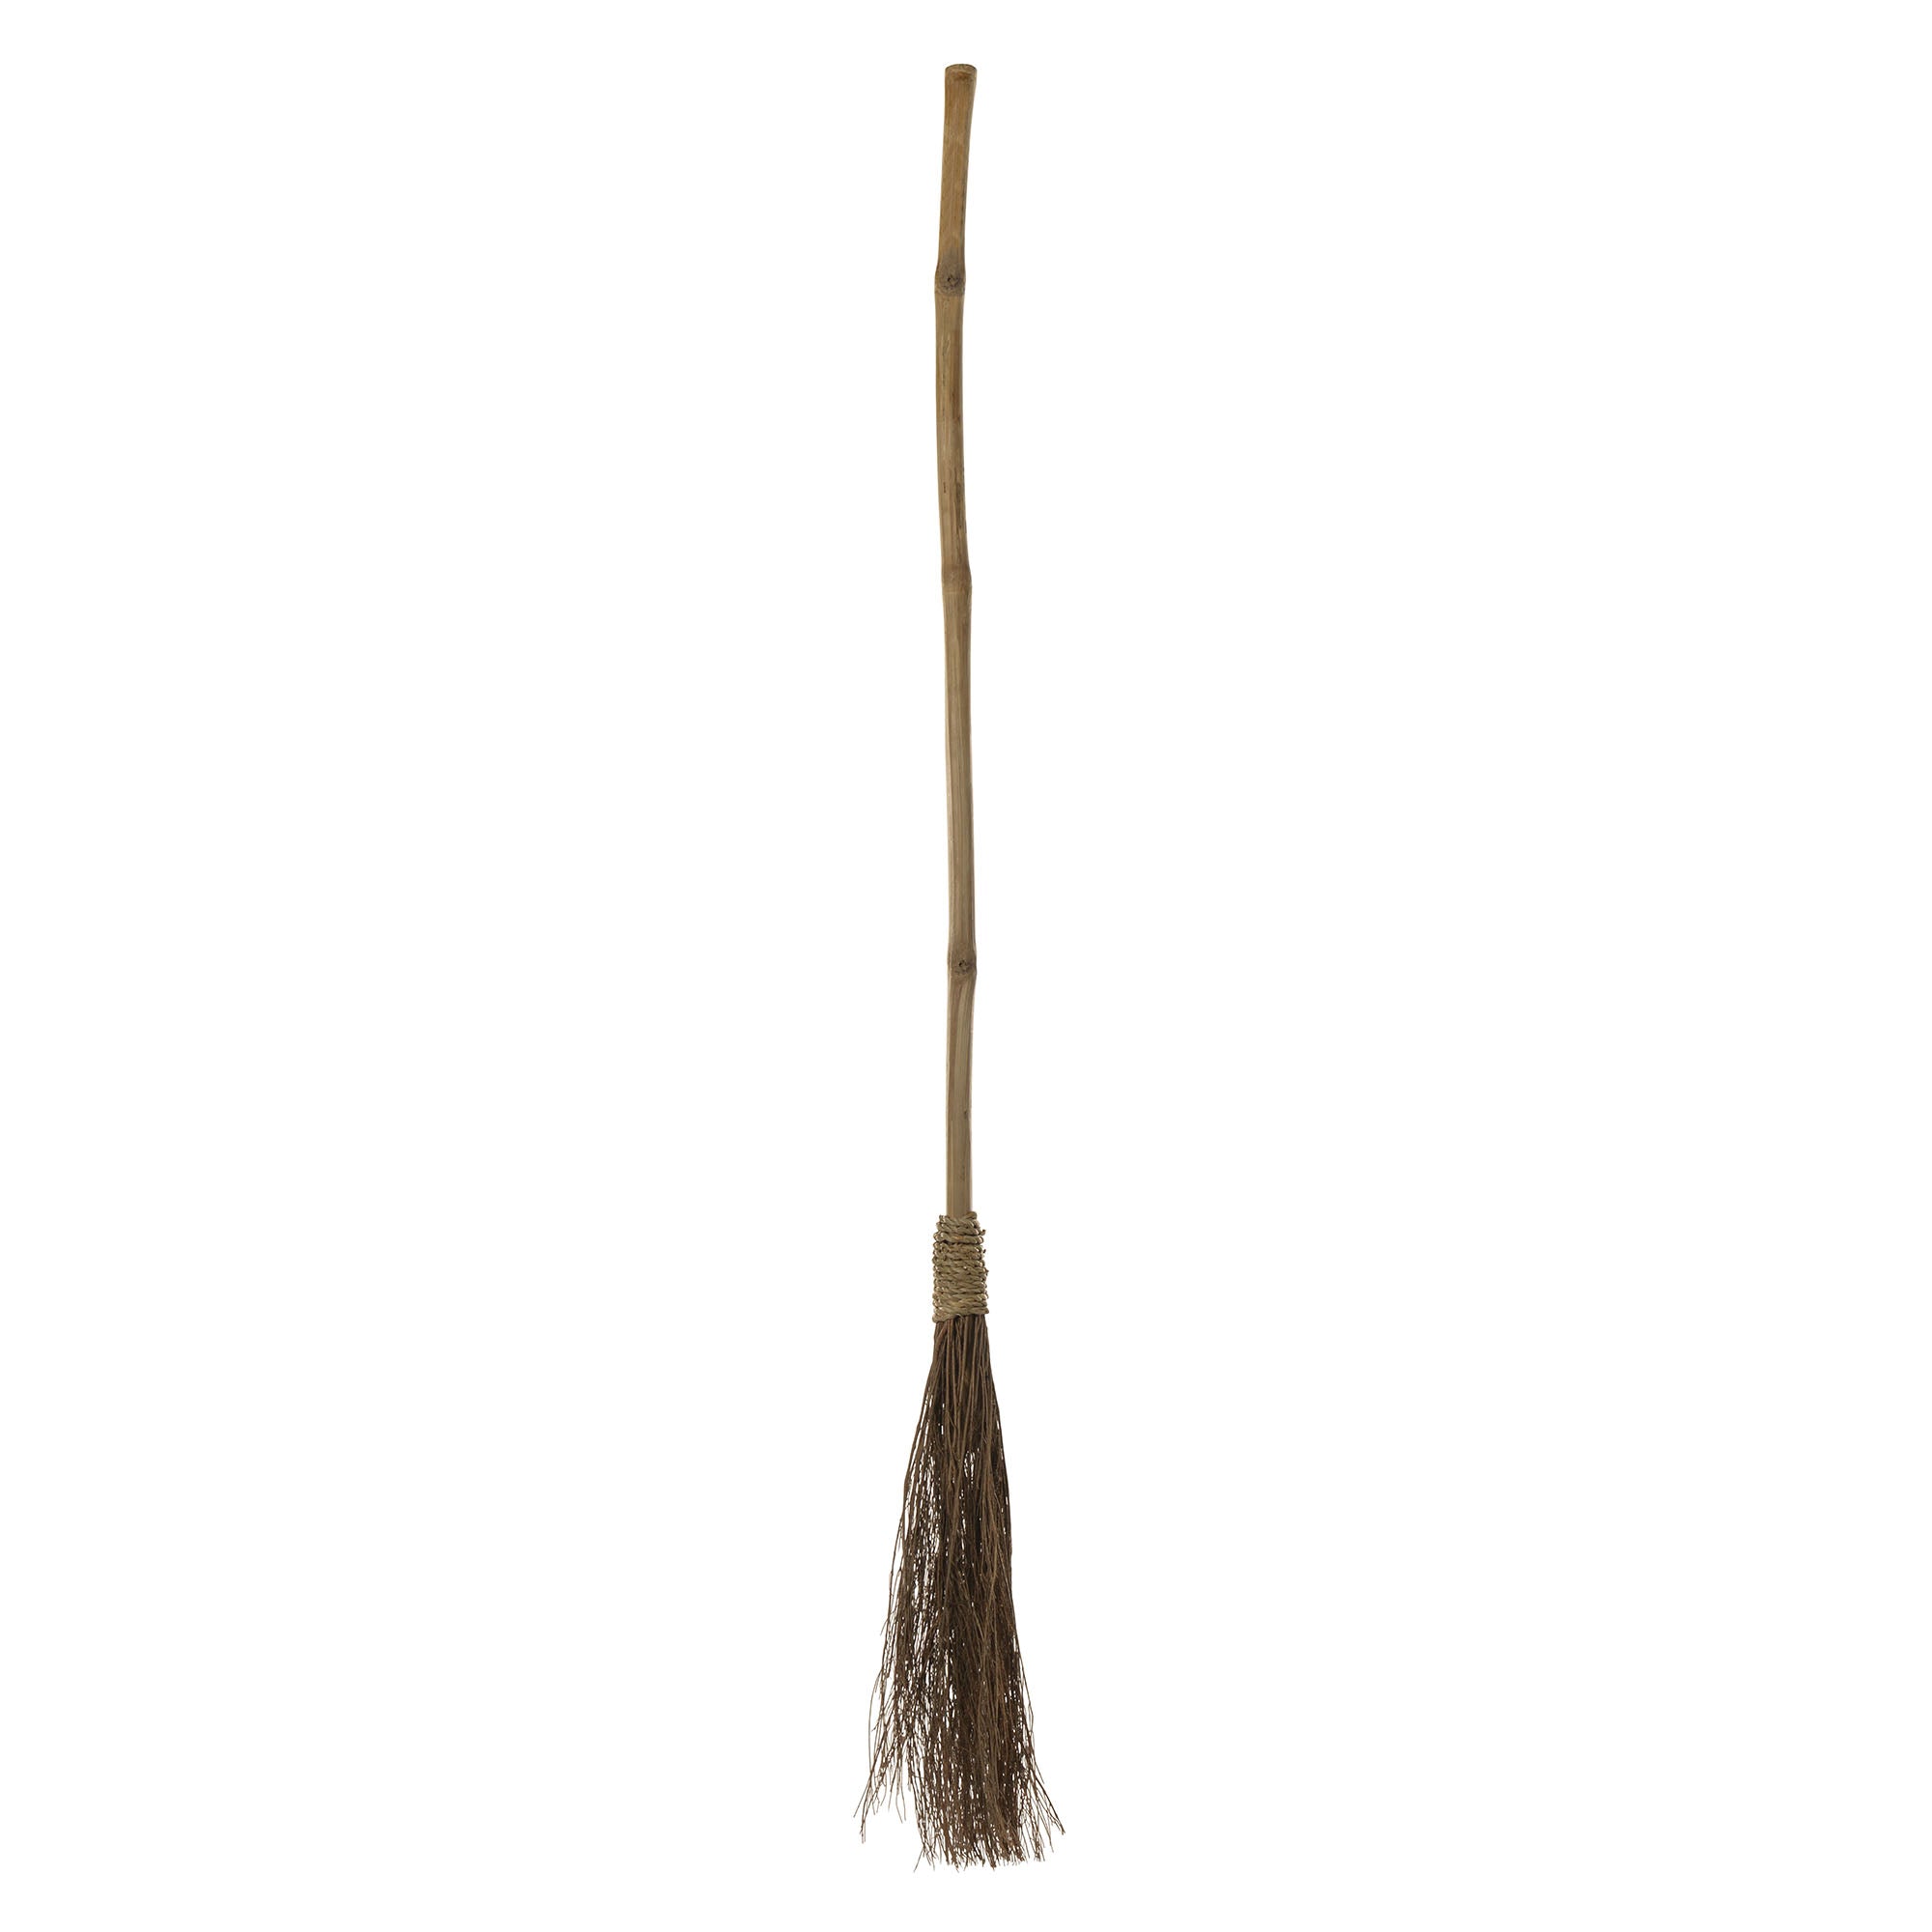 Straw Witches 44" Long Broom Package of 1